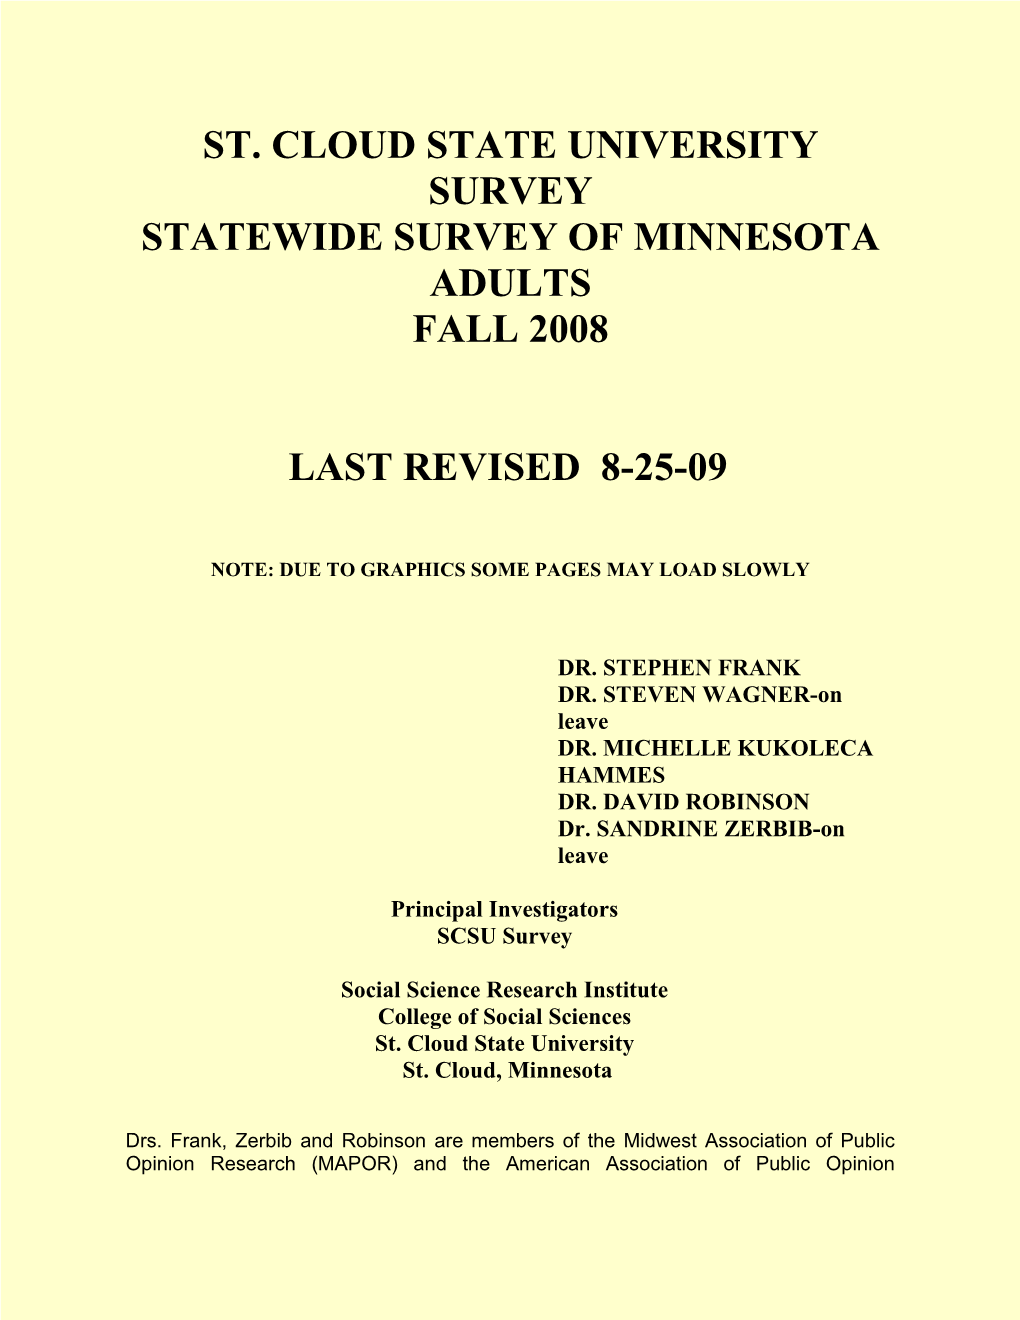 Fall 2008 Statewide Survey